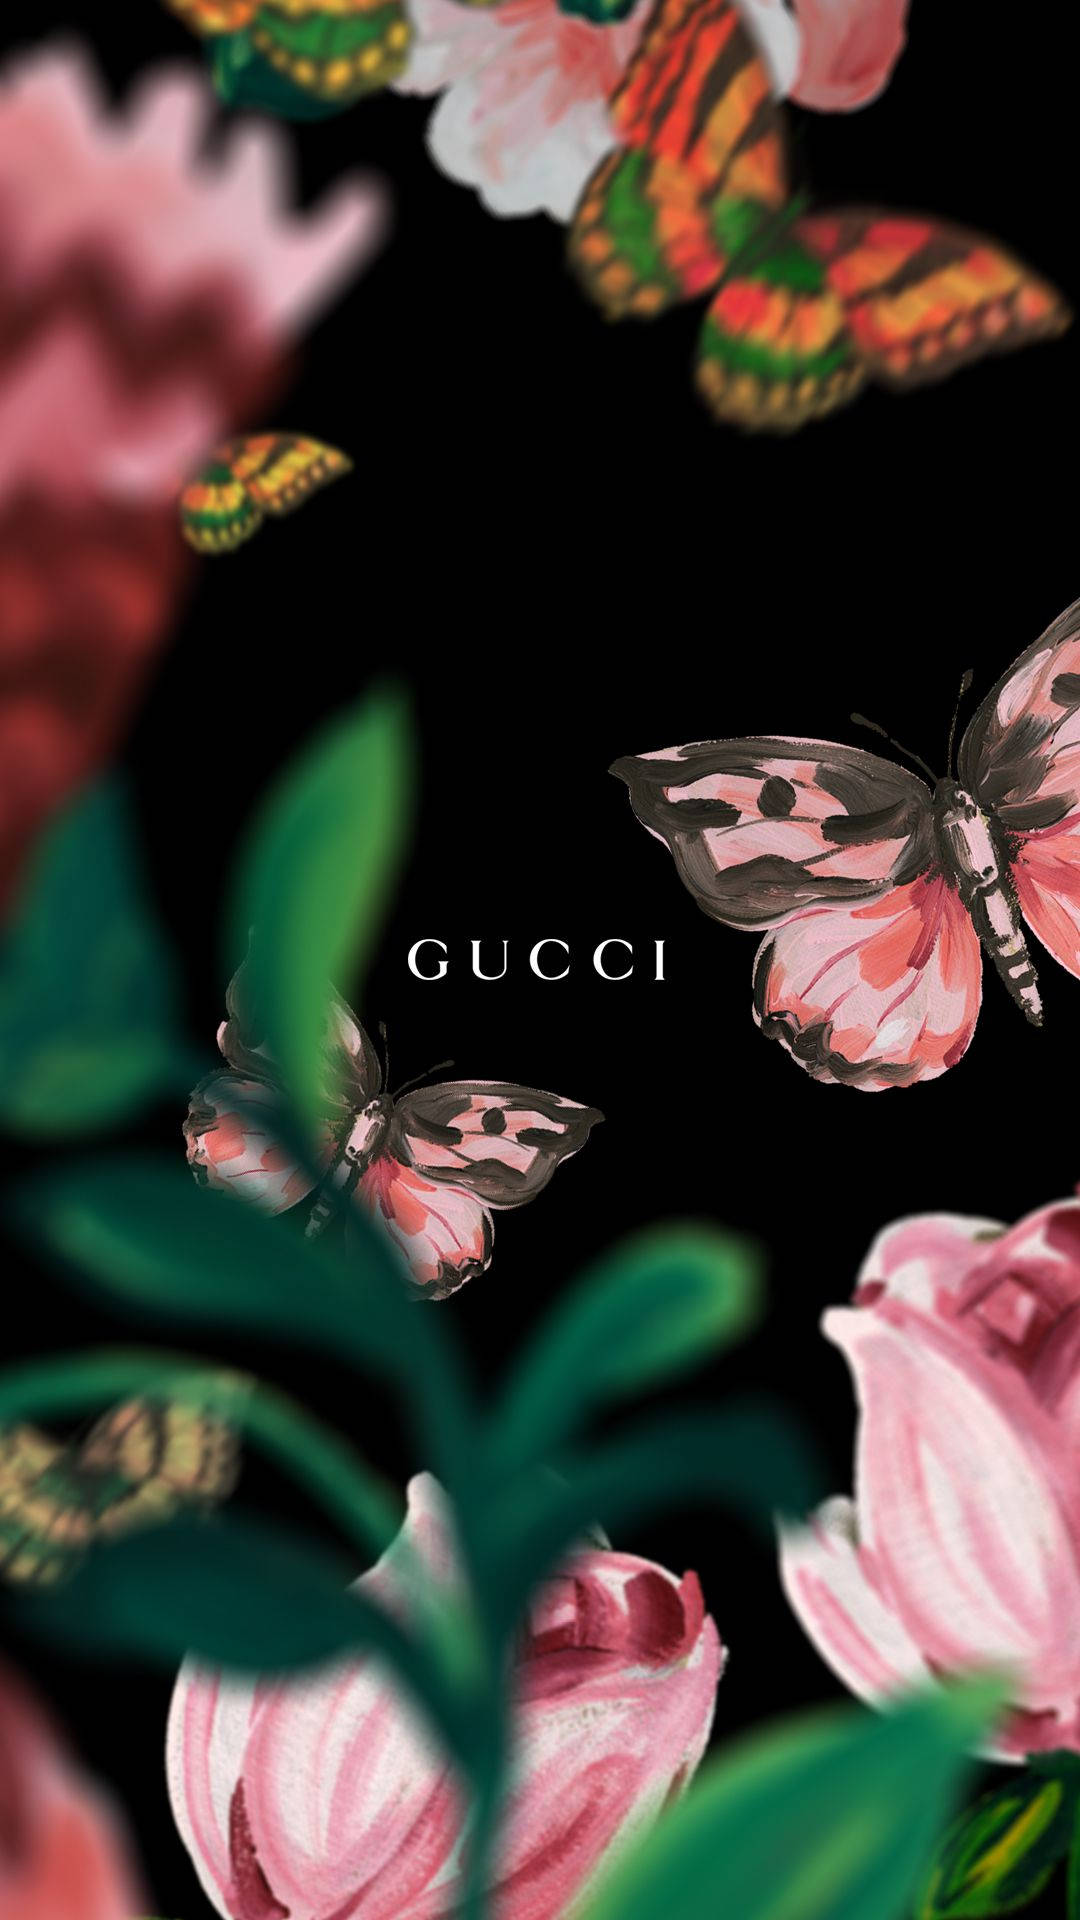 Get noticed with Gucci's signature luxury fashion apparel. Wallpaper